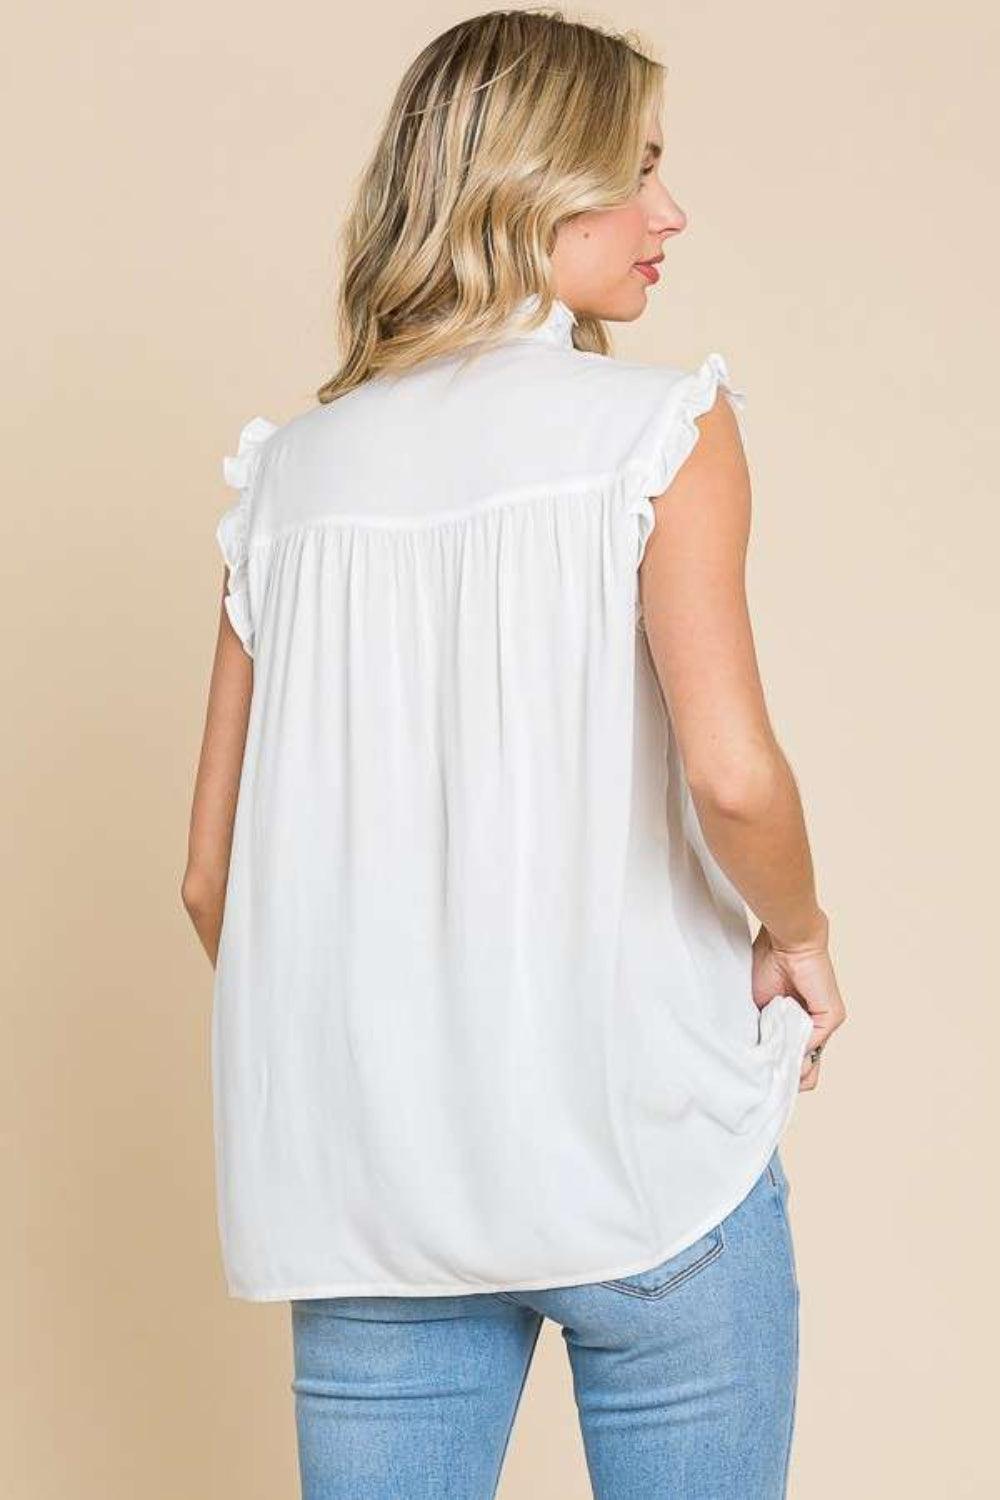 Culture Code Full Size Frill Edge Smocked Sleeveless Top Shirts & Tops